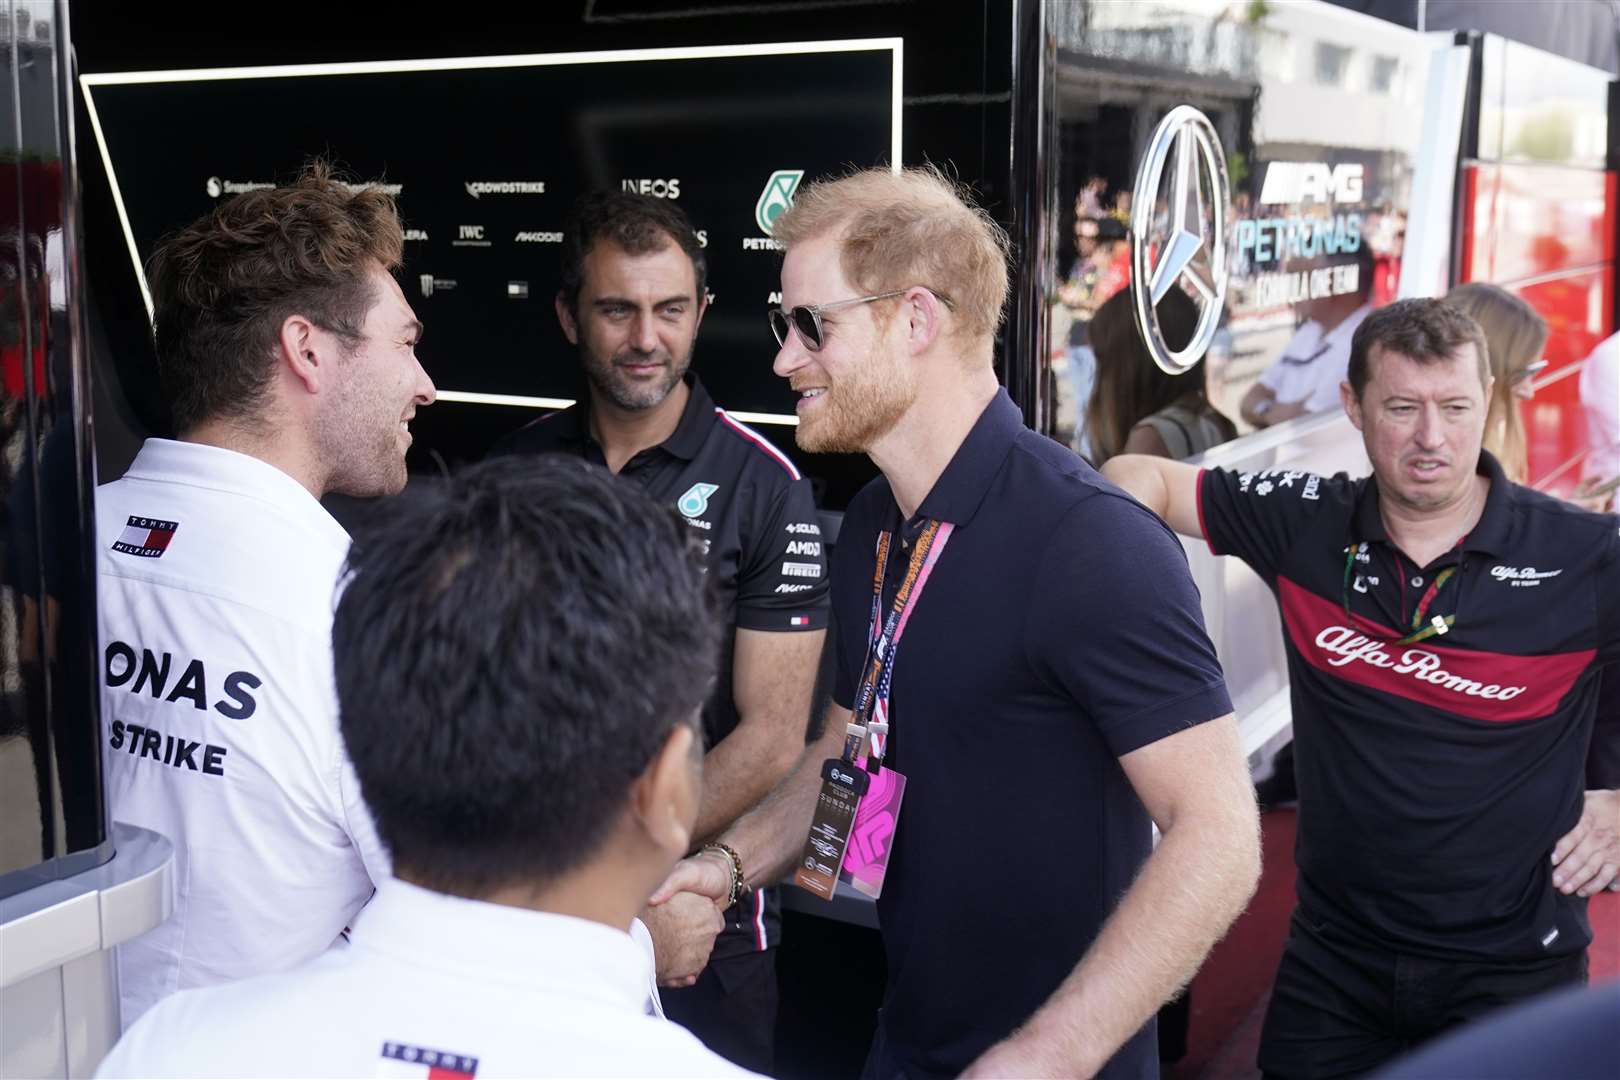 The Duke of Sussex toured the Mercedes garage at the course (Darron Cummings/AP)